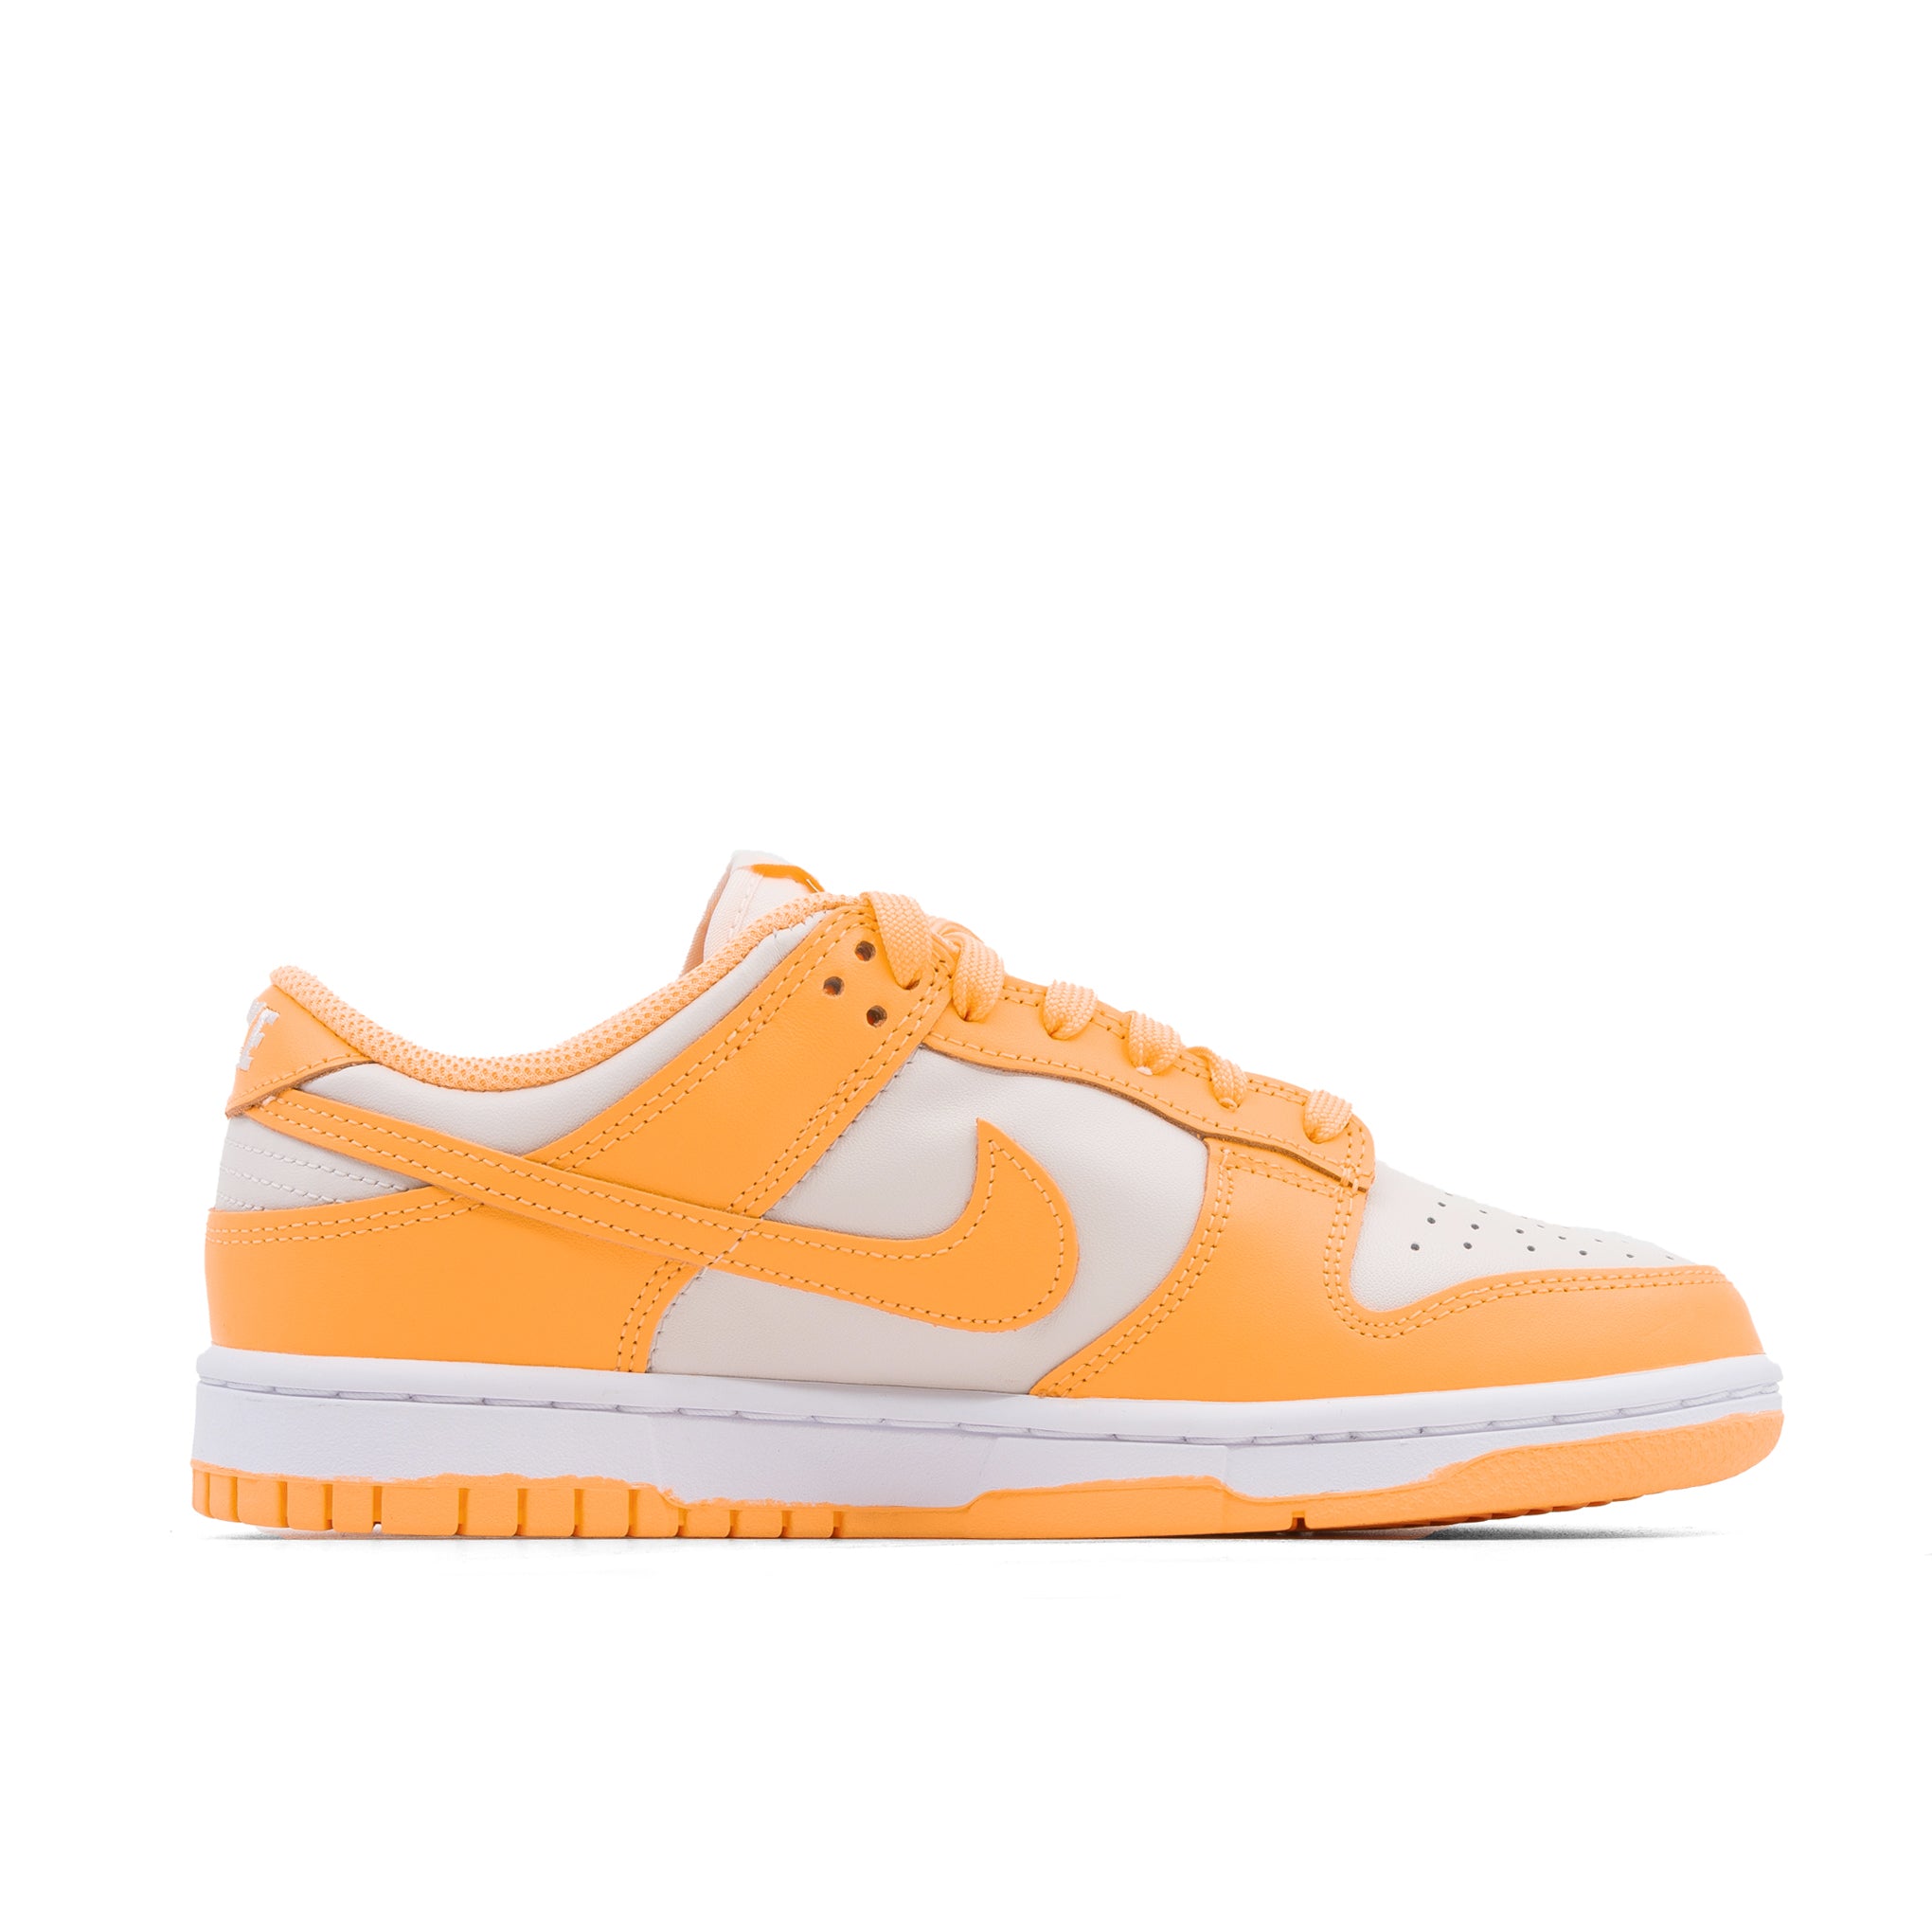 NIKE DUNK LOW MUJER MELOCOTÓN CREMA